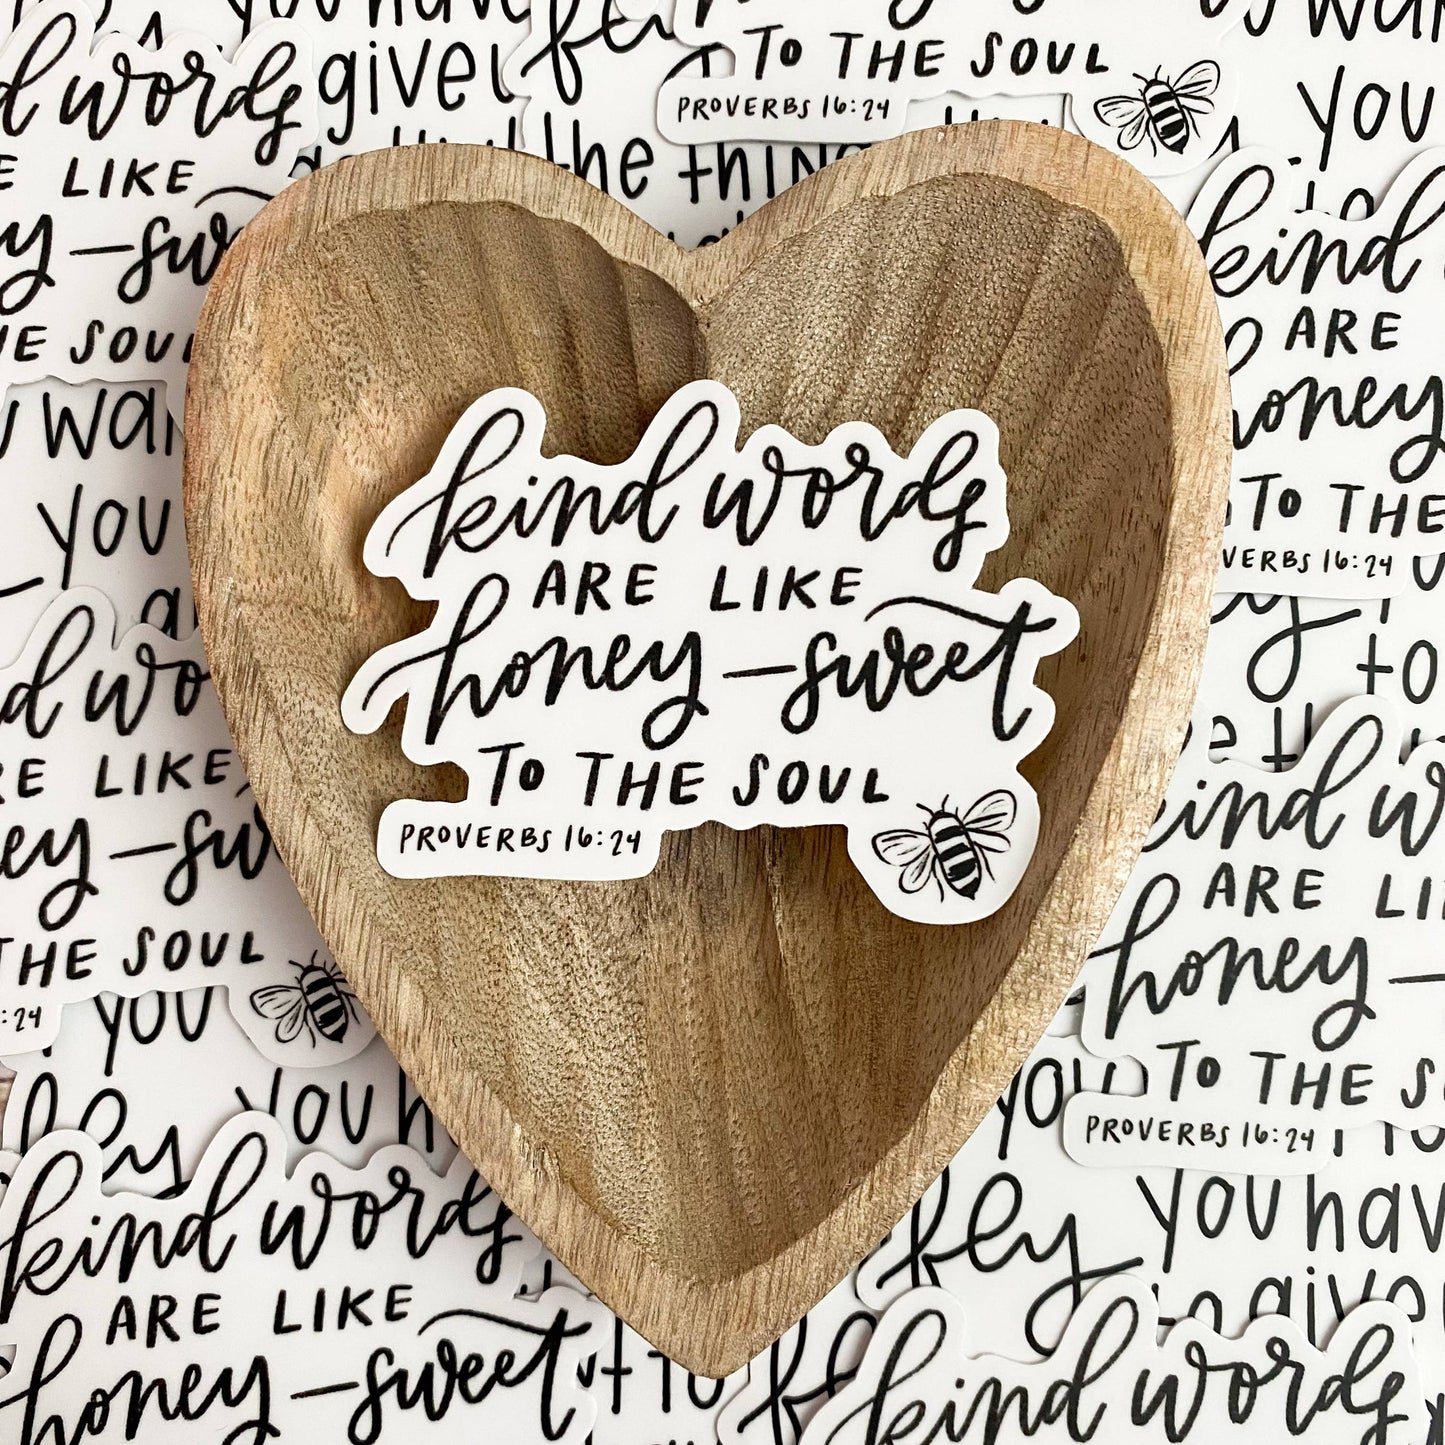 Proverbs 16:24 Sticker | Kind words are like honey | Be kind *FREE SHIPPING with any order over $10